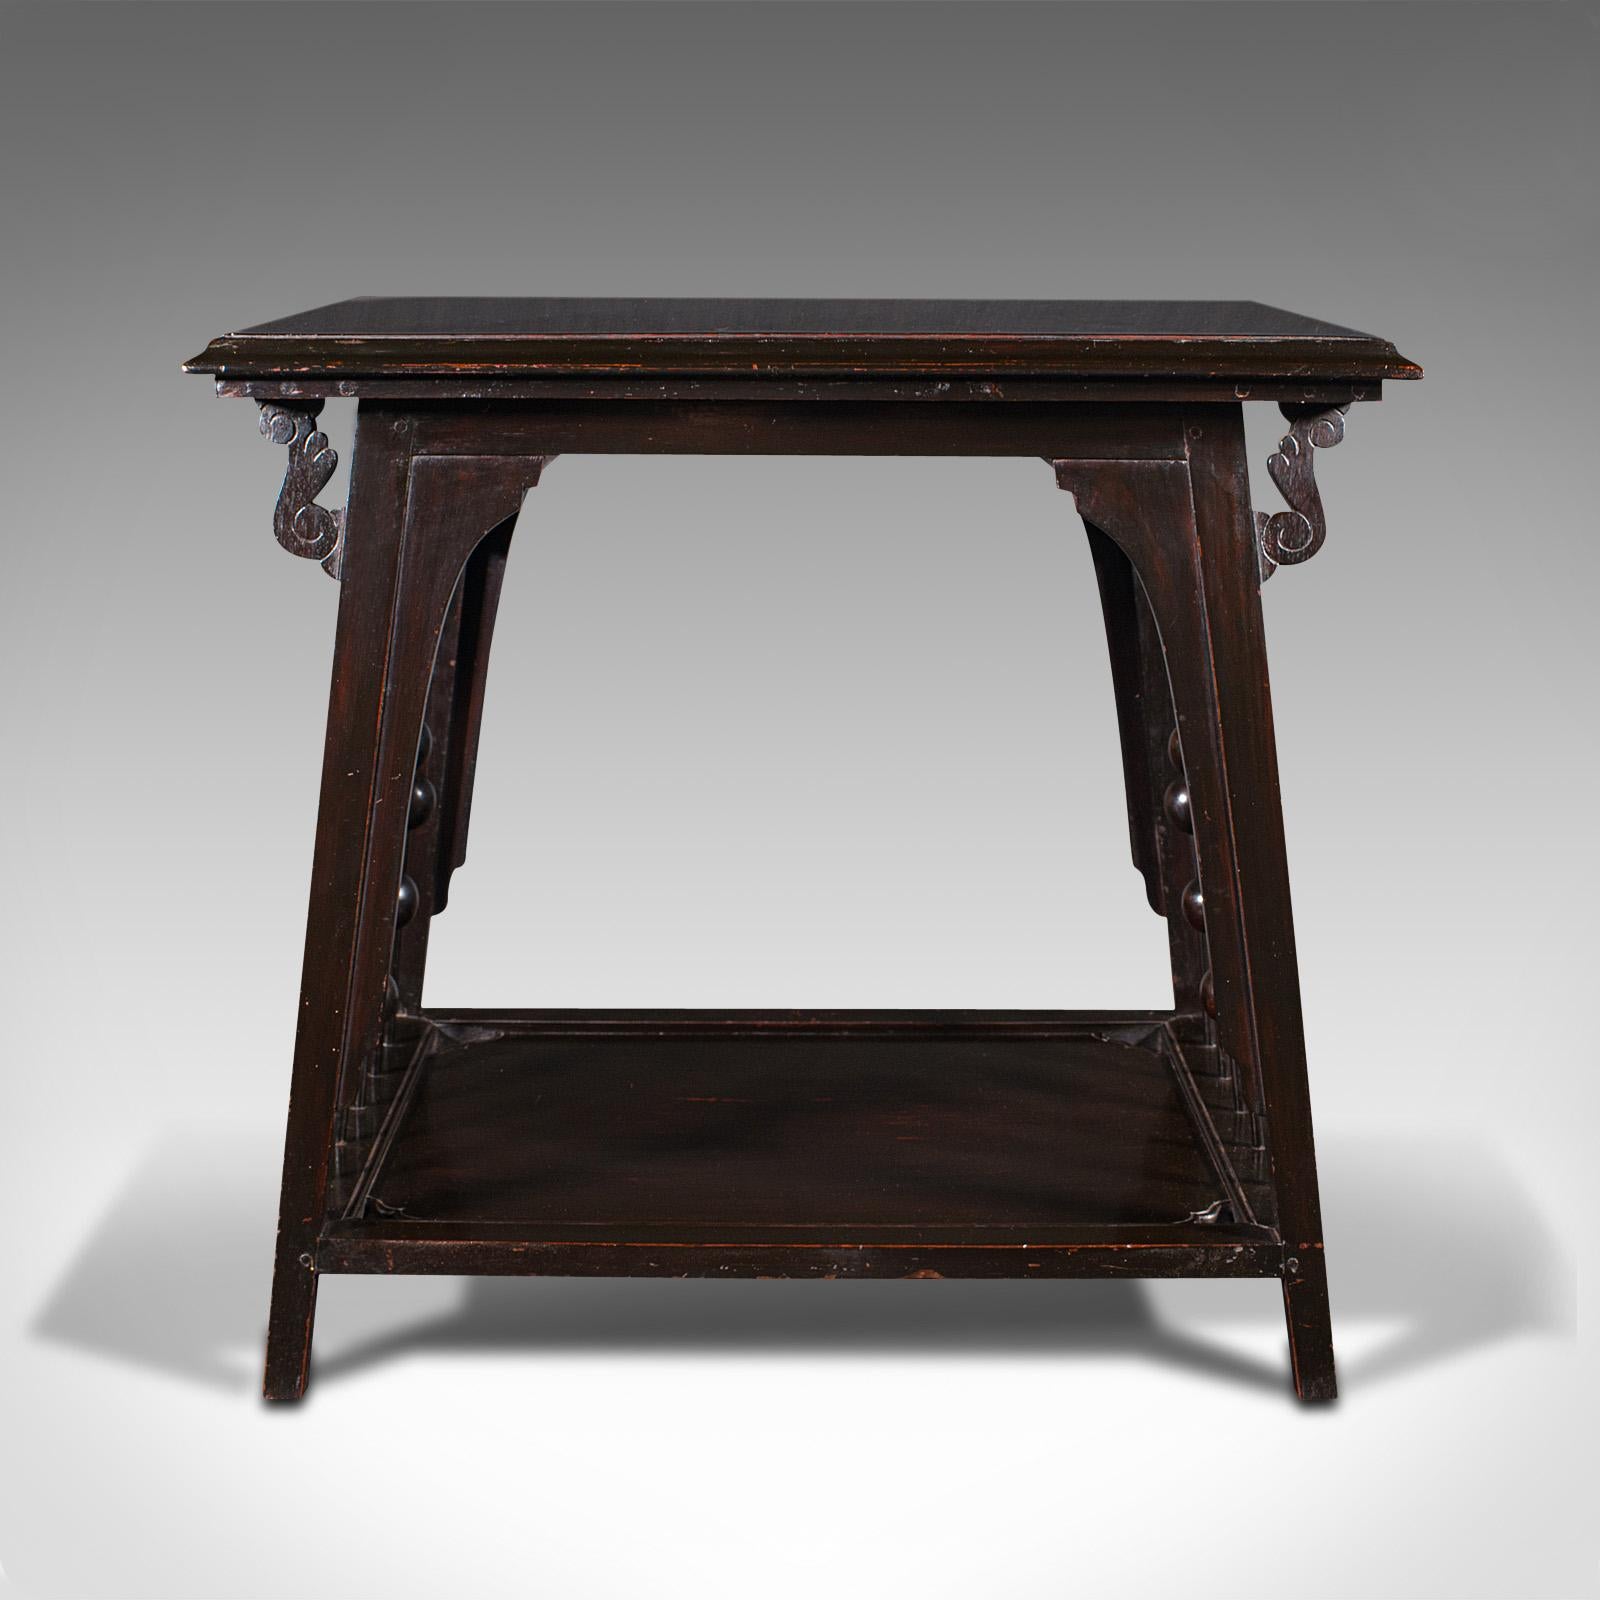 This is an antique occasional table. An English, ebonised side or lamp table in the manner of E.W. Godwin and the Aesthetic movement, dating to the Victorian period, circa 1880.

Distinctive two tier table with strong Aesthetic period